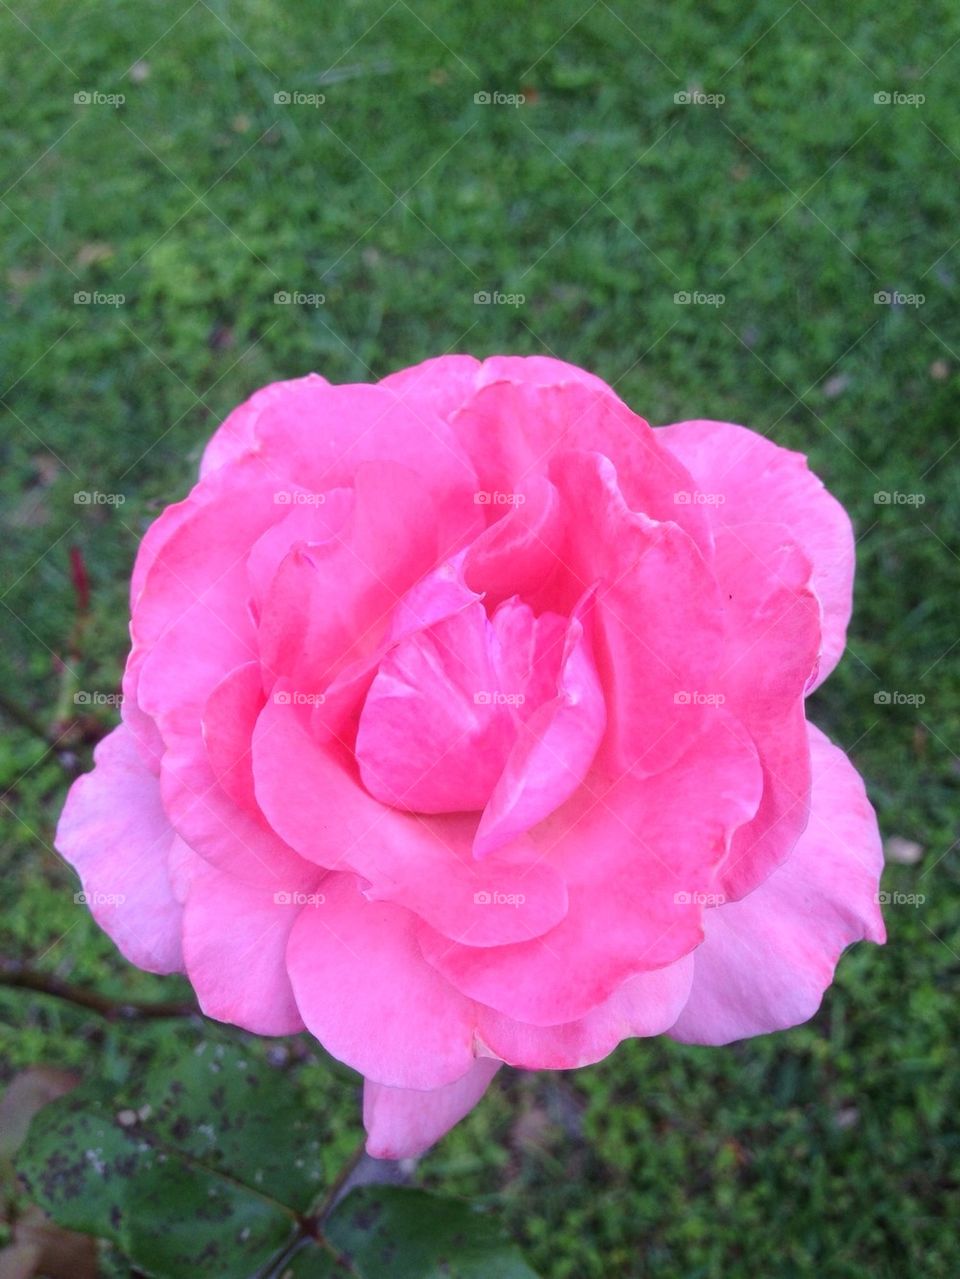 Roses are also pink.